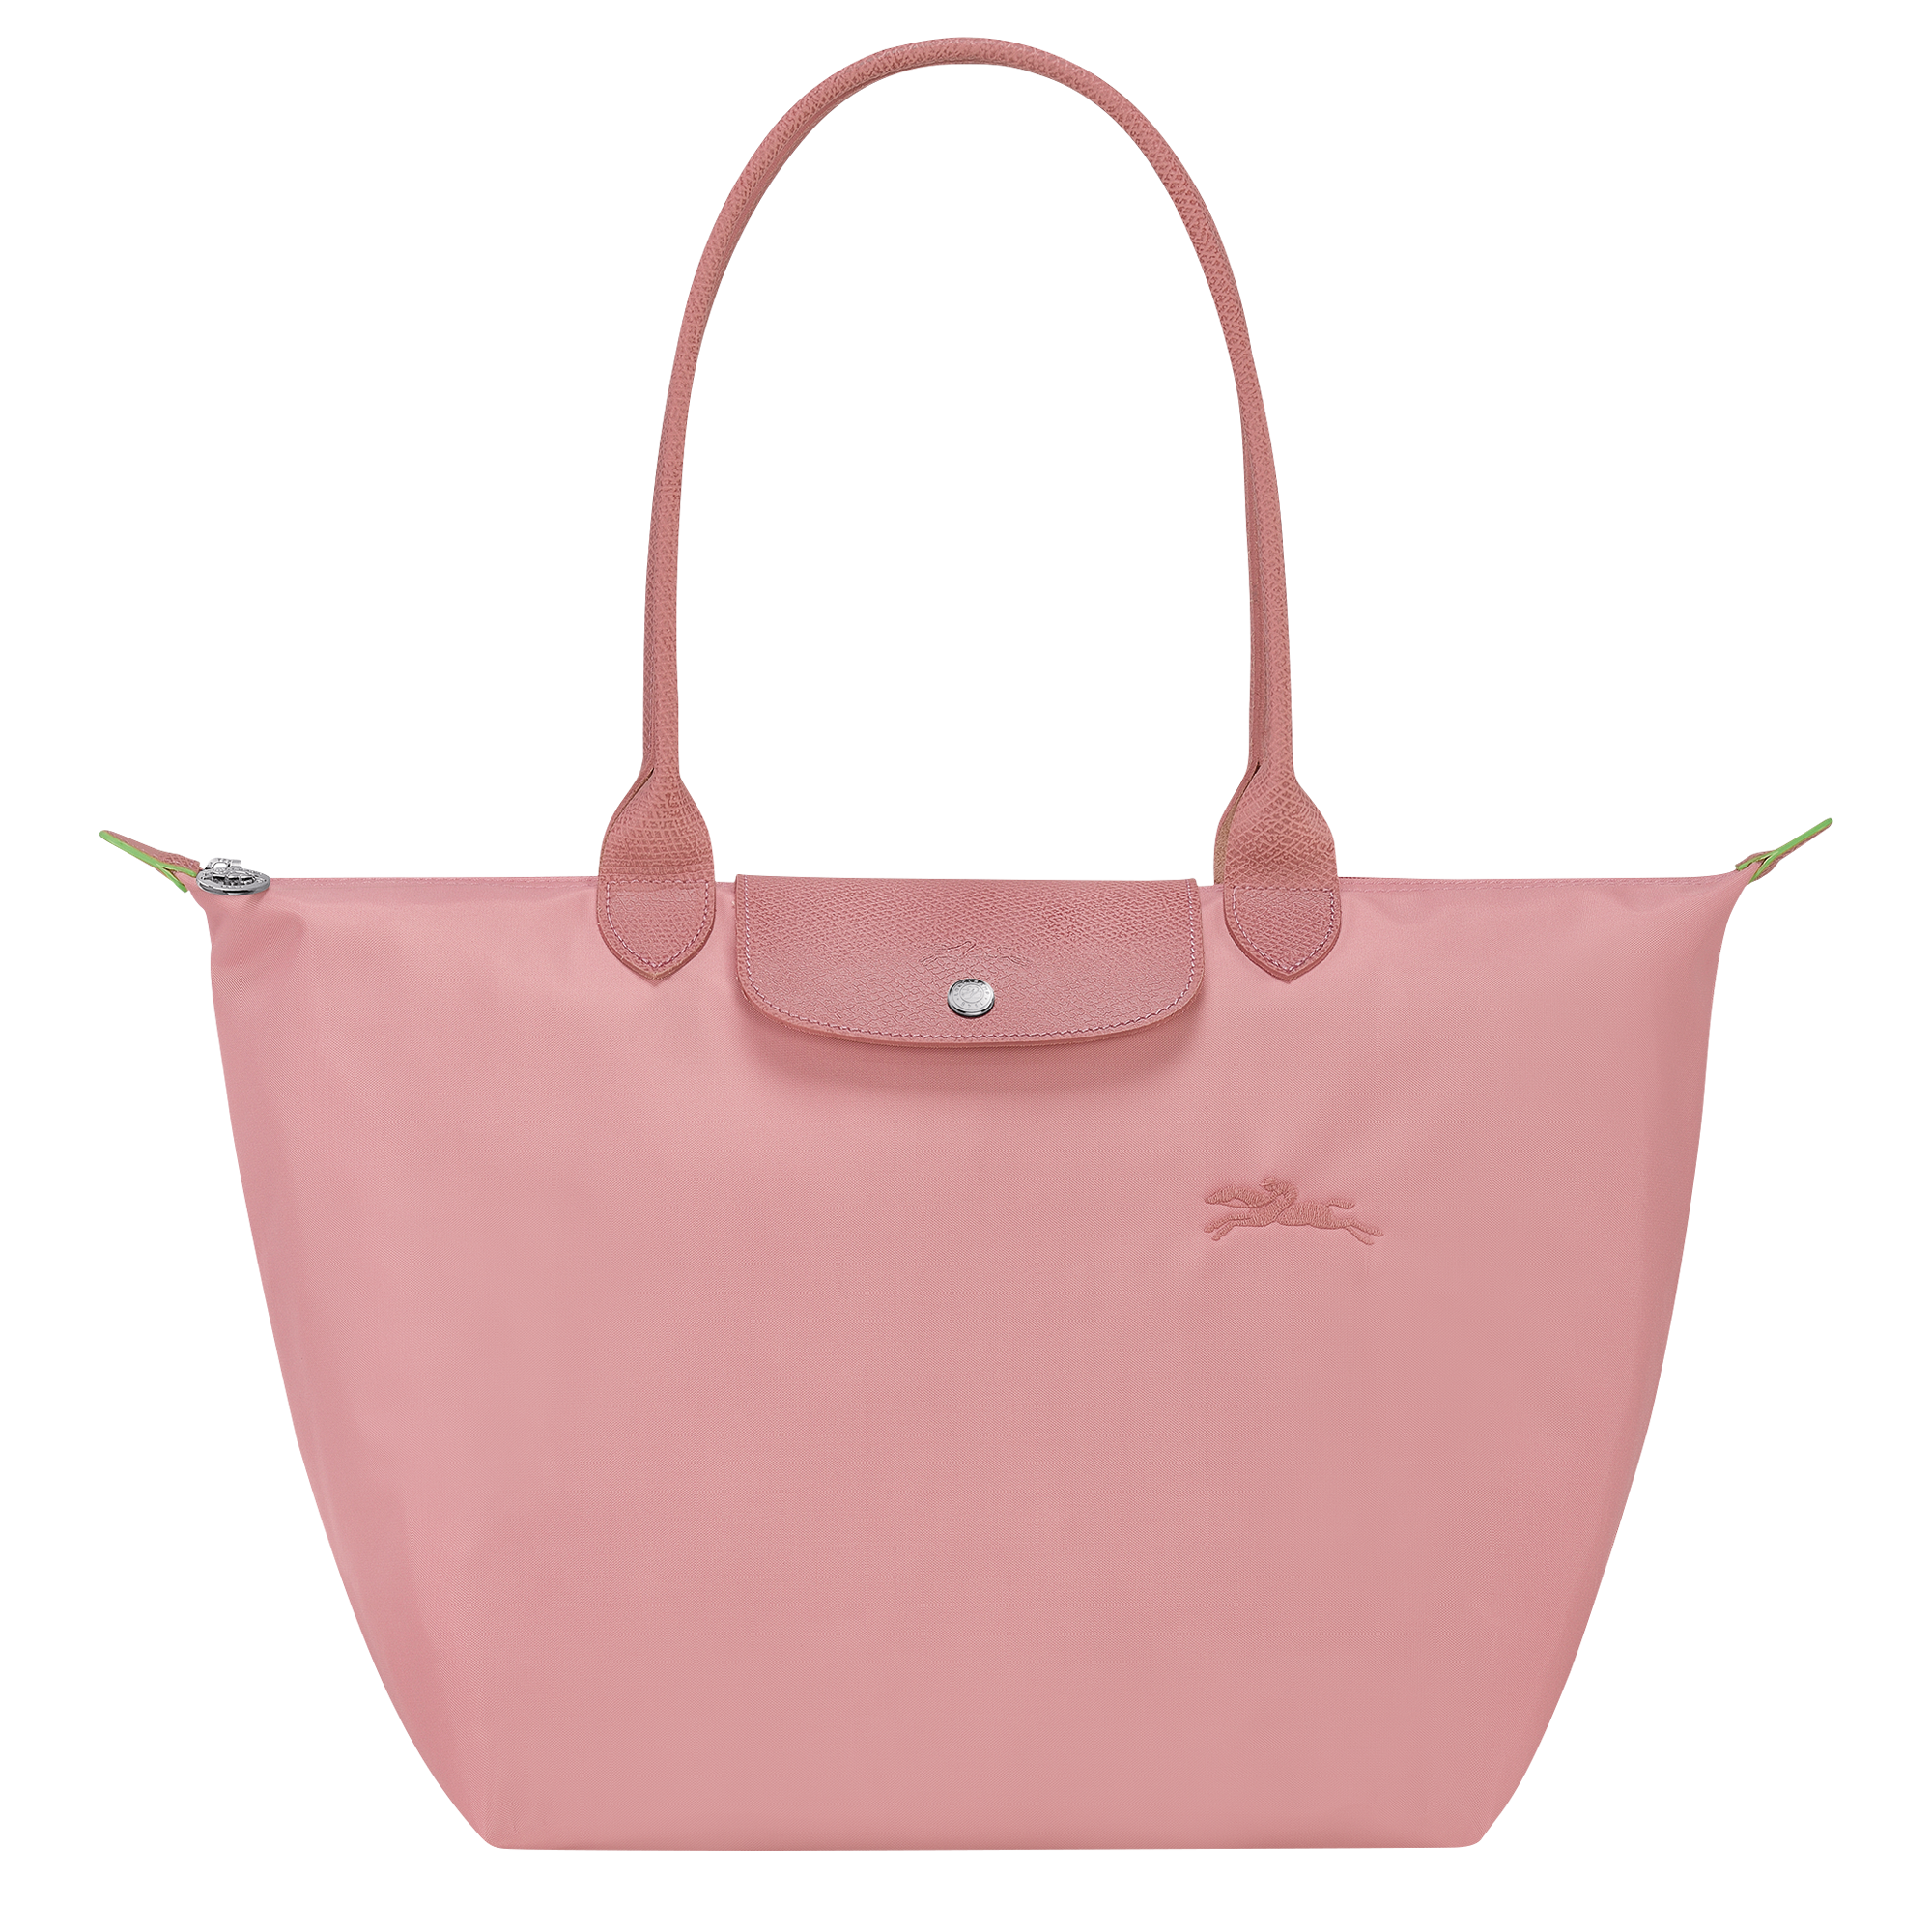 BAG REVIEW (Longchamp Le Pliage Filet), Gallery posted by putri.